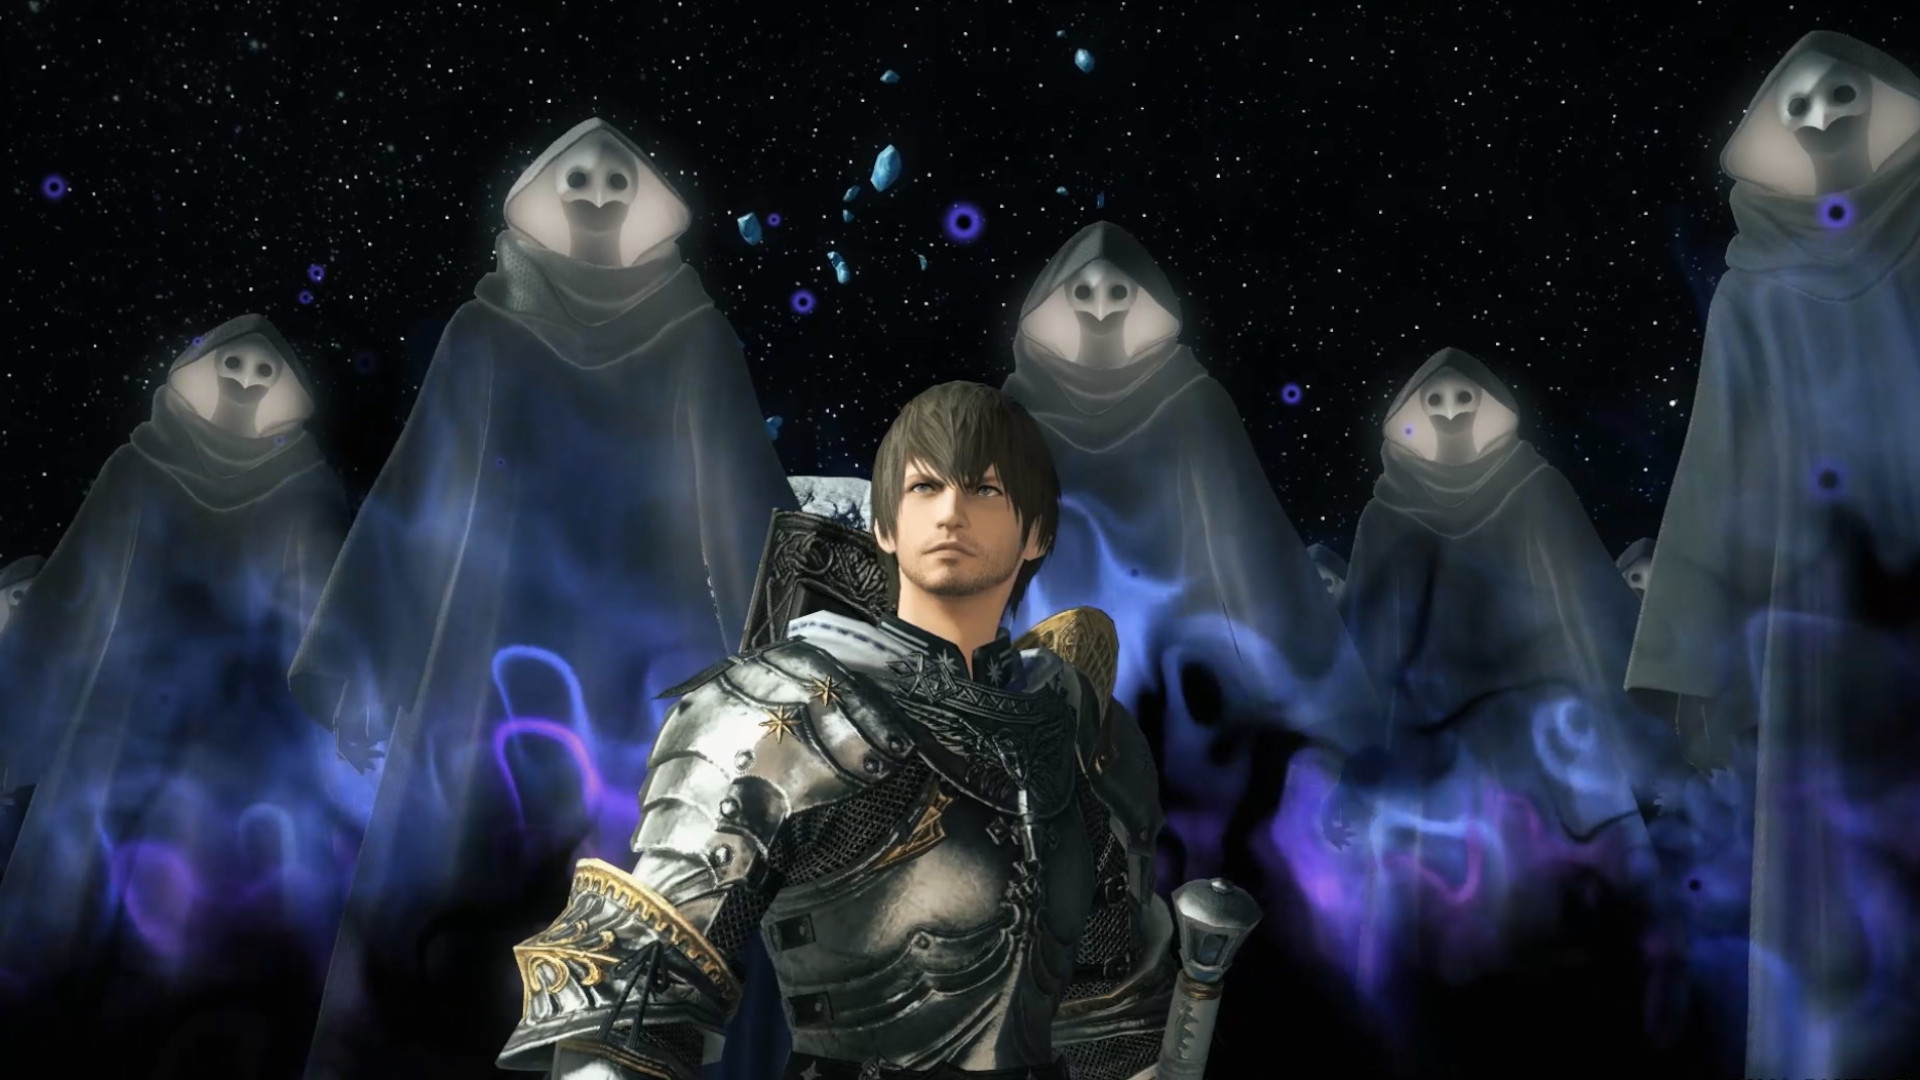 FFXIV Endwalker release time – servers go down 24 hours ahead of the expansion